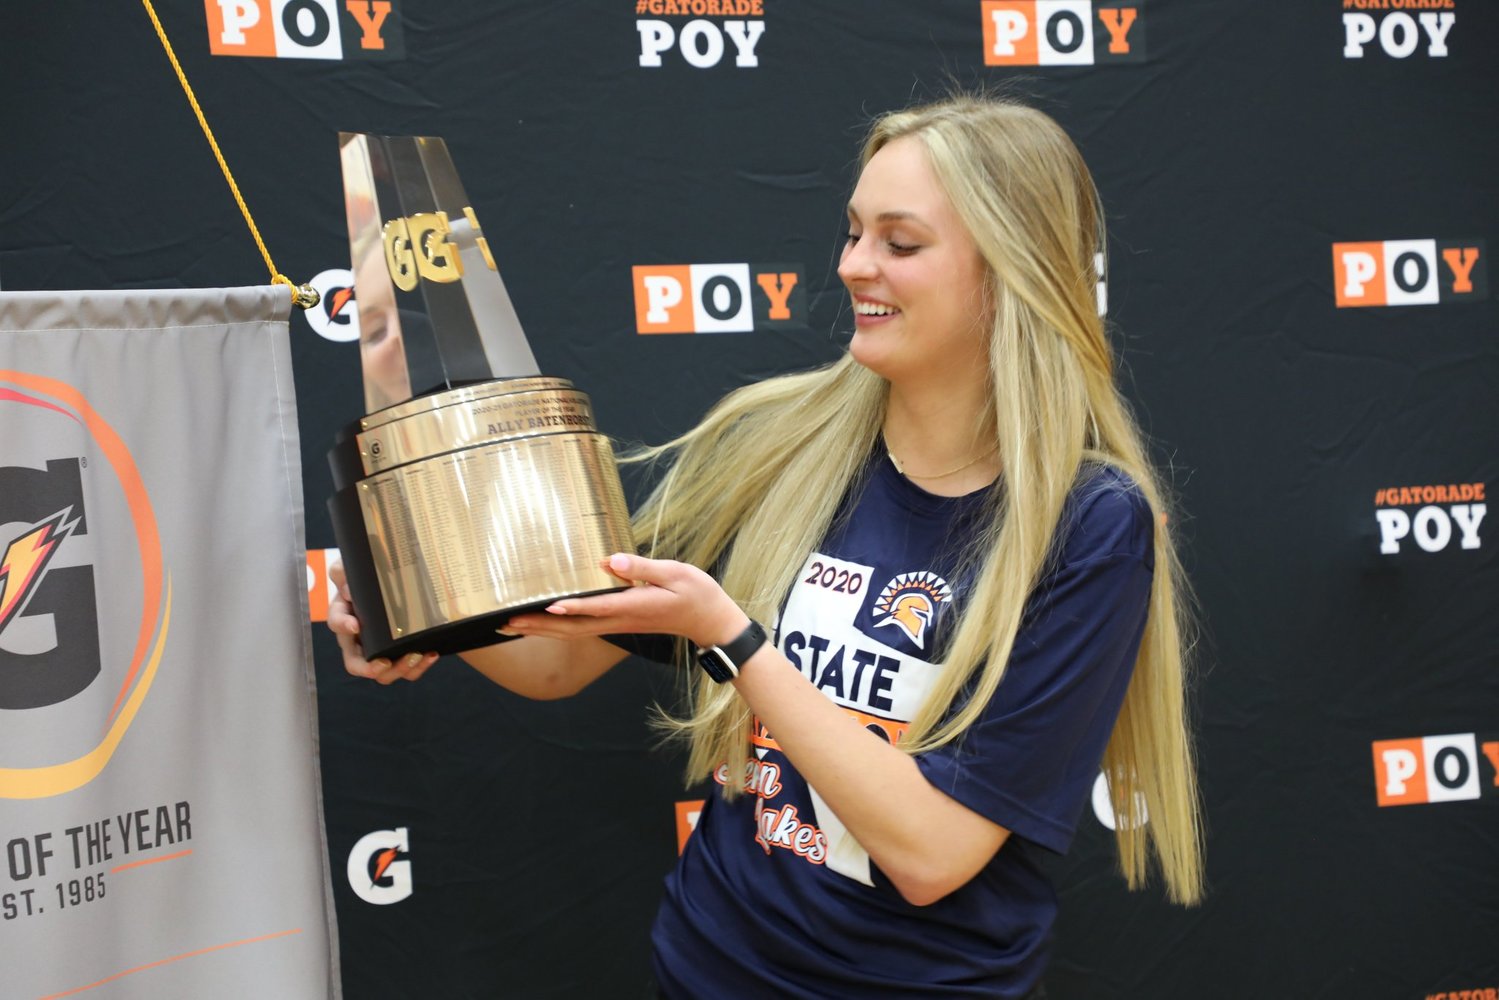 Former Seven Lakes star Ally Batenhorst looks on at the 2020-21 Gatorade Volleyball National Player of the Year trophy that she was honored with on Wednesday at Seven Lakes High School.